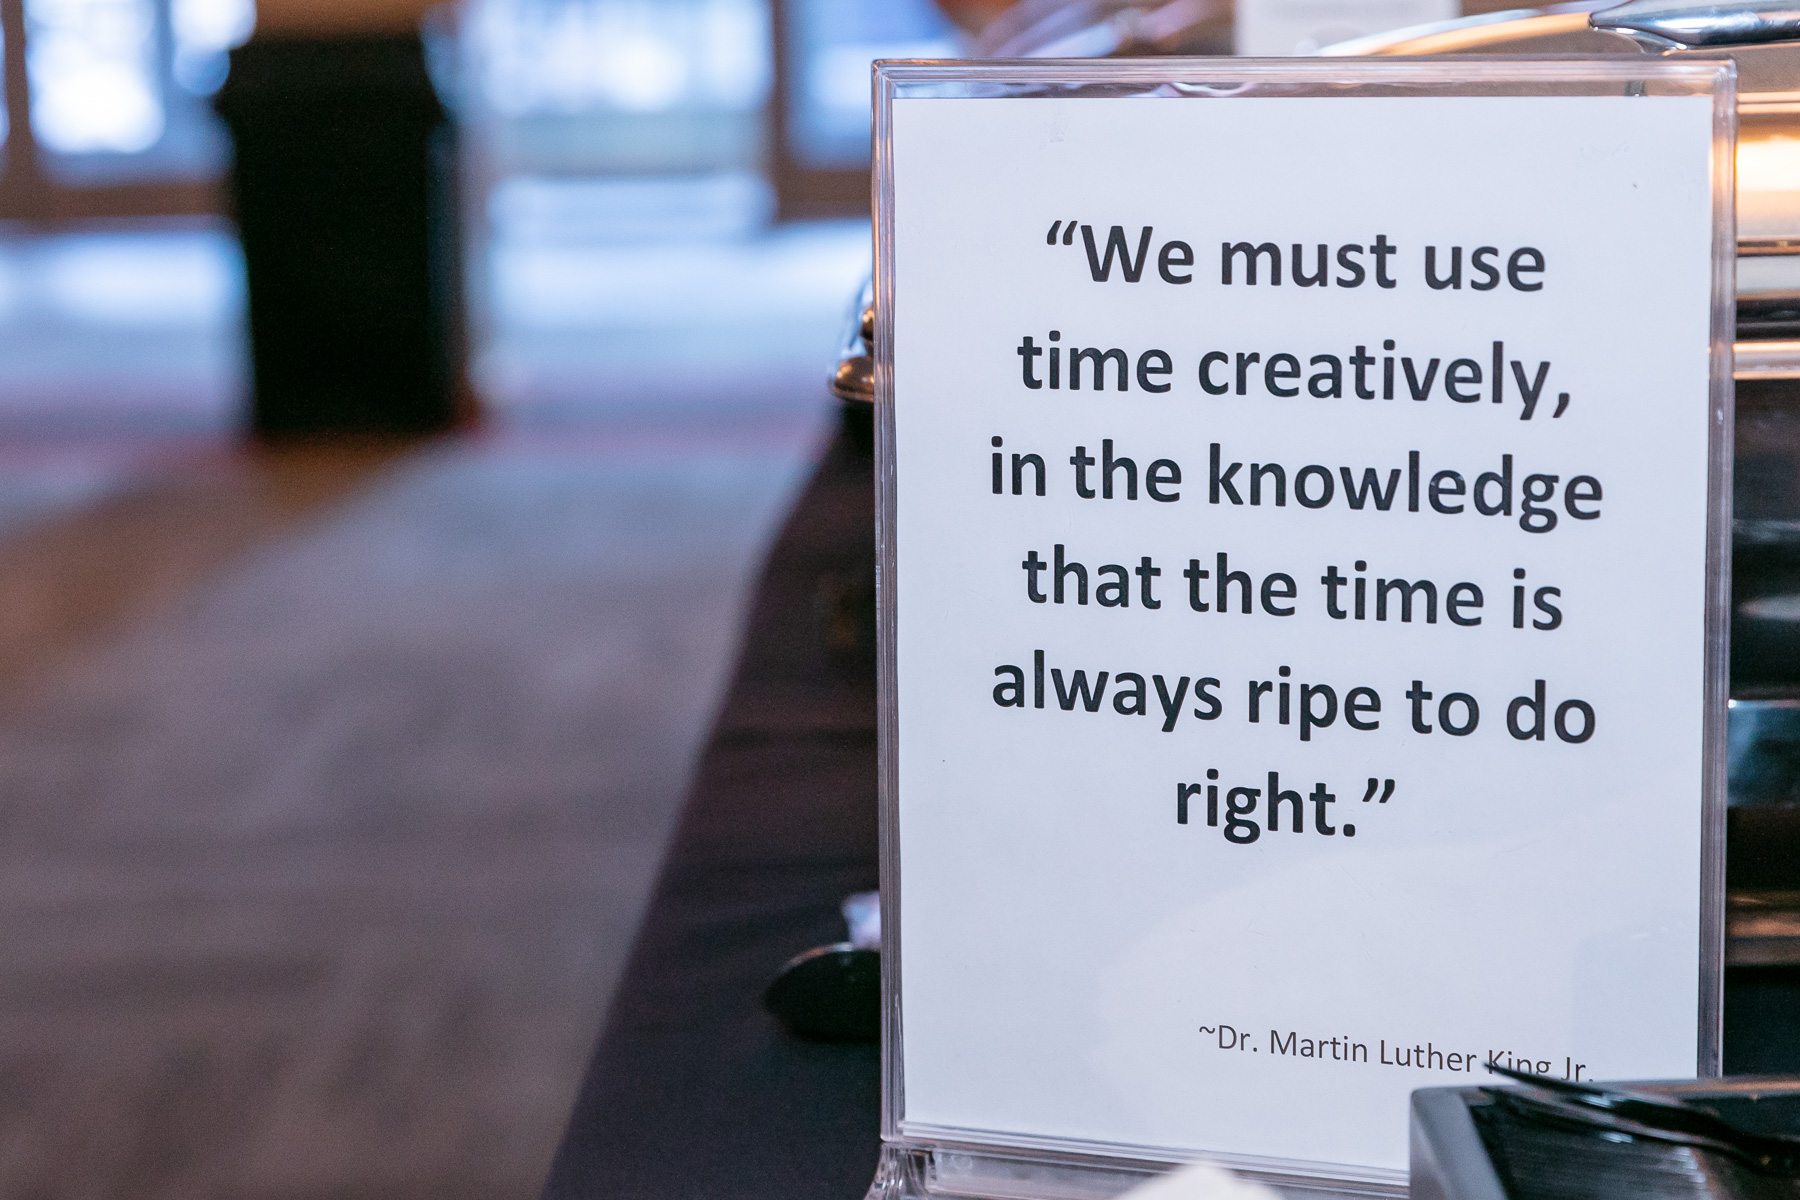 During the Rev. Dr. Martin Luther King, Jr. prayer breakfast, inspirational quotes were posted as a reminder of Dr. King’s legacy and his impact on social justice. (DePaul University/Randall Spriggs)